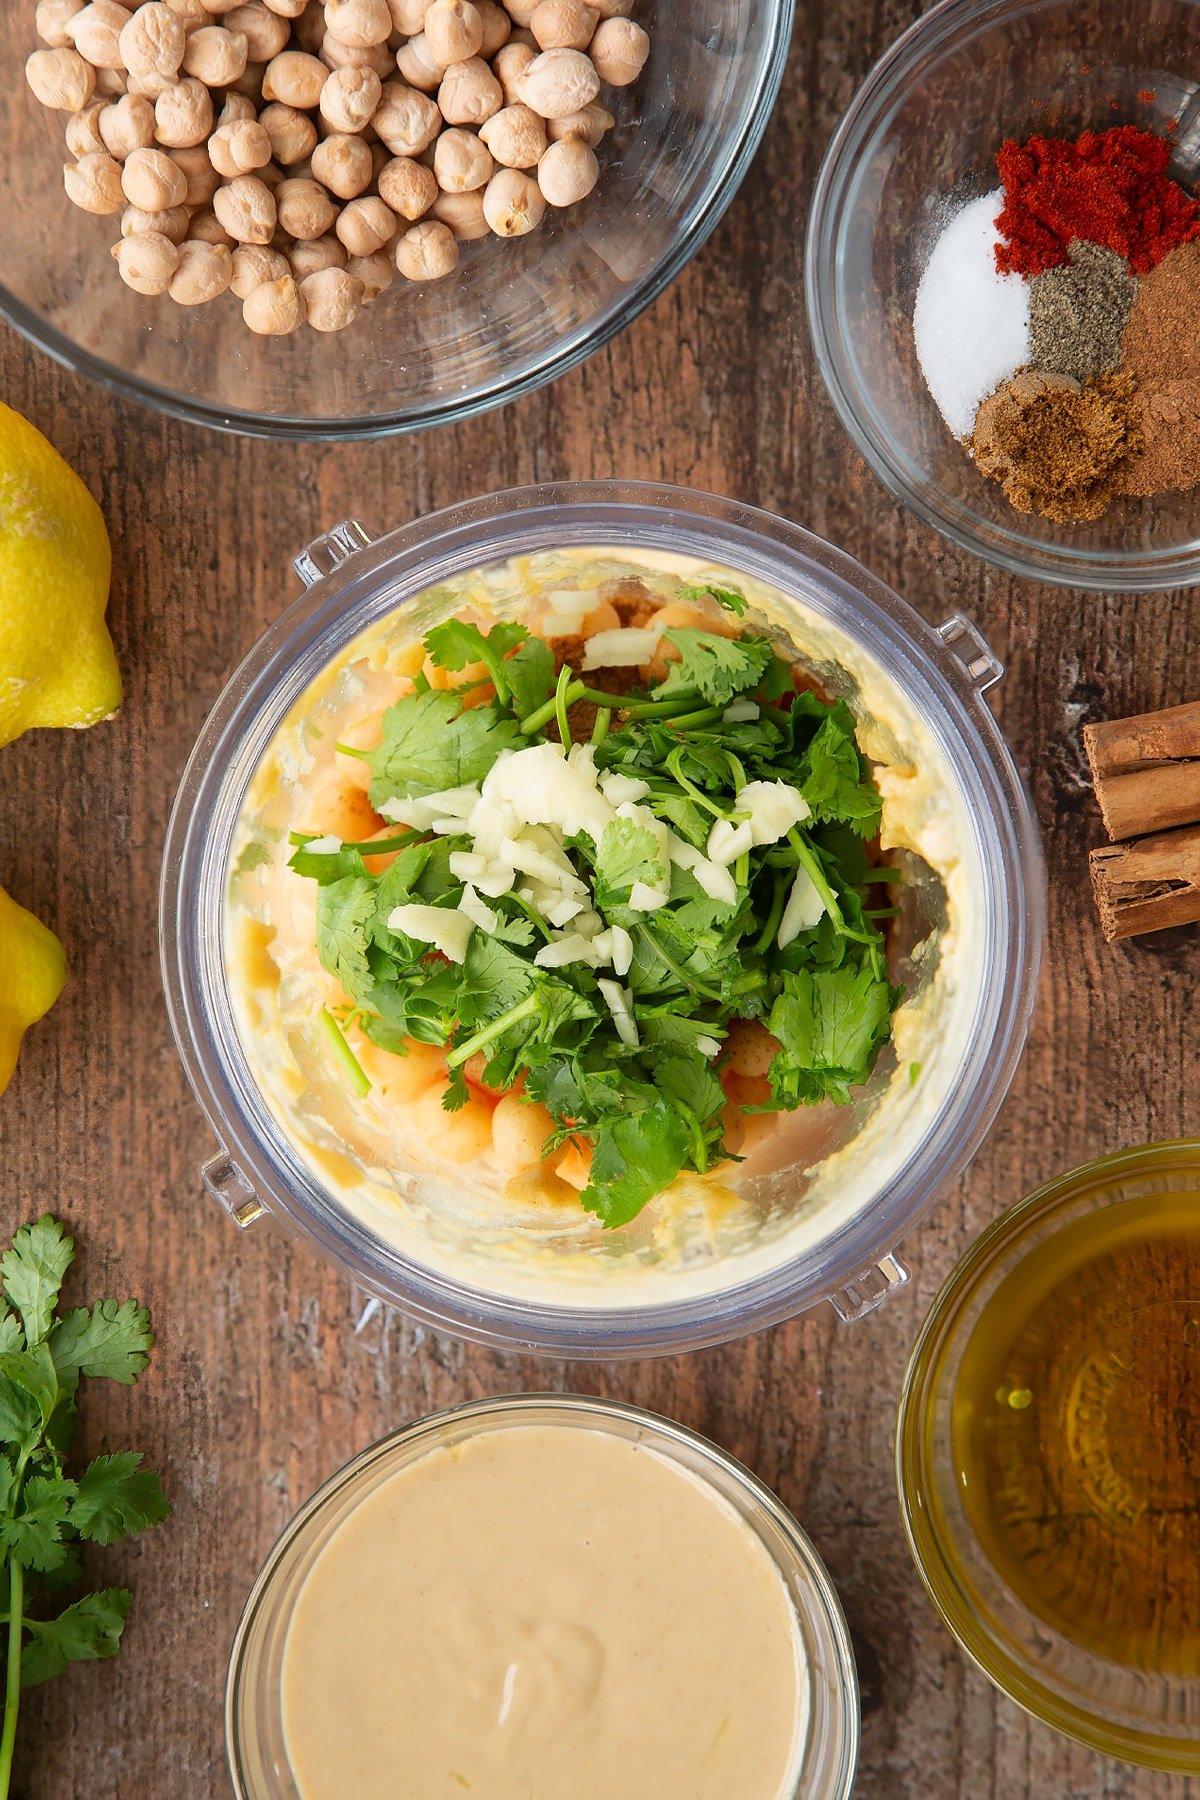 Tahini, lemon juice and oil whipped together in a small blender bowl with cooked chickpeas, spices, fresh coriander and garlic on top. Ingredients to make cinnamon hummus surround the bowl.